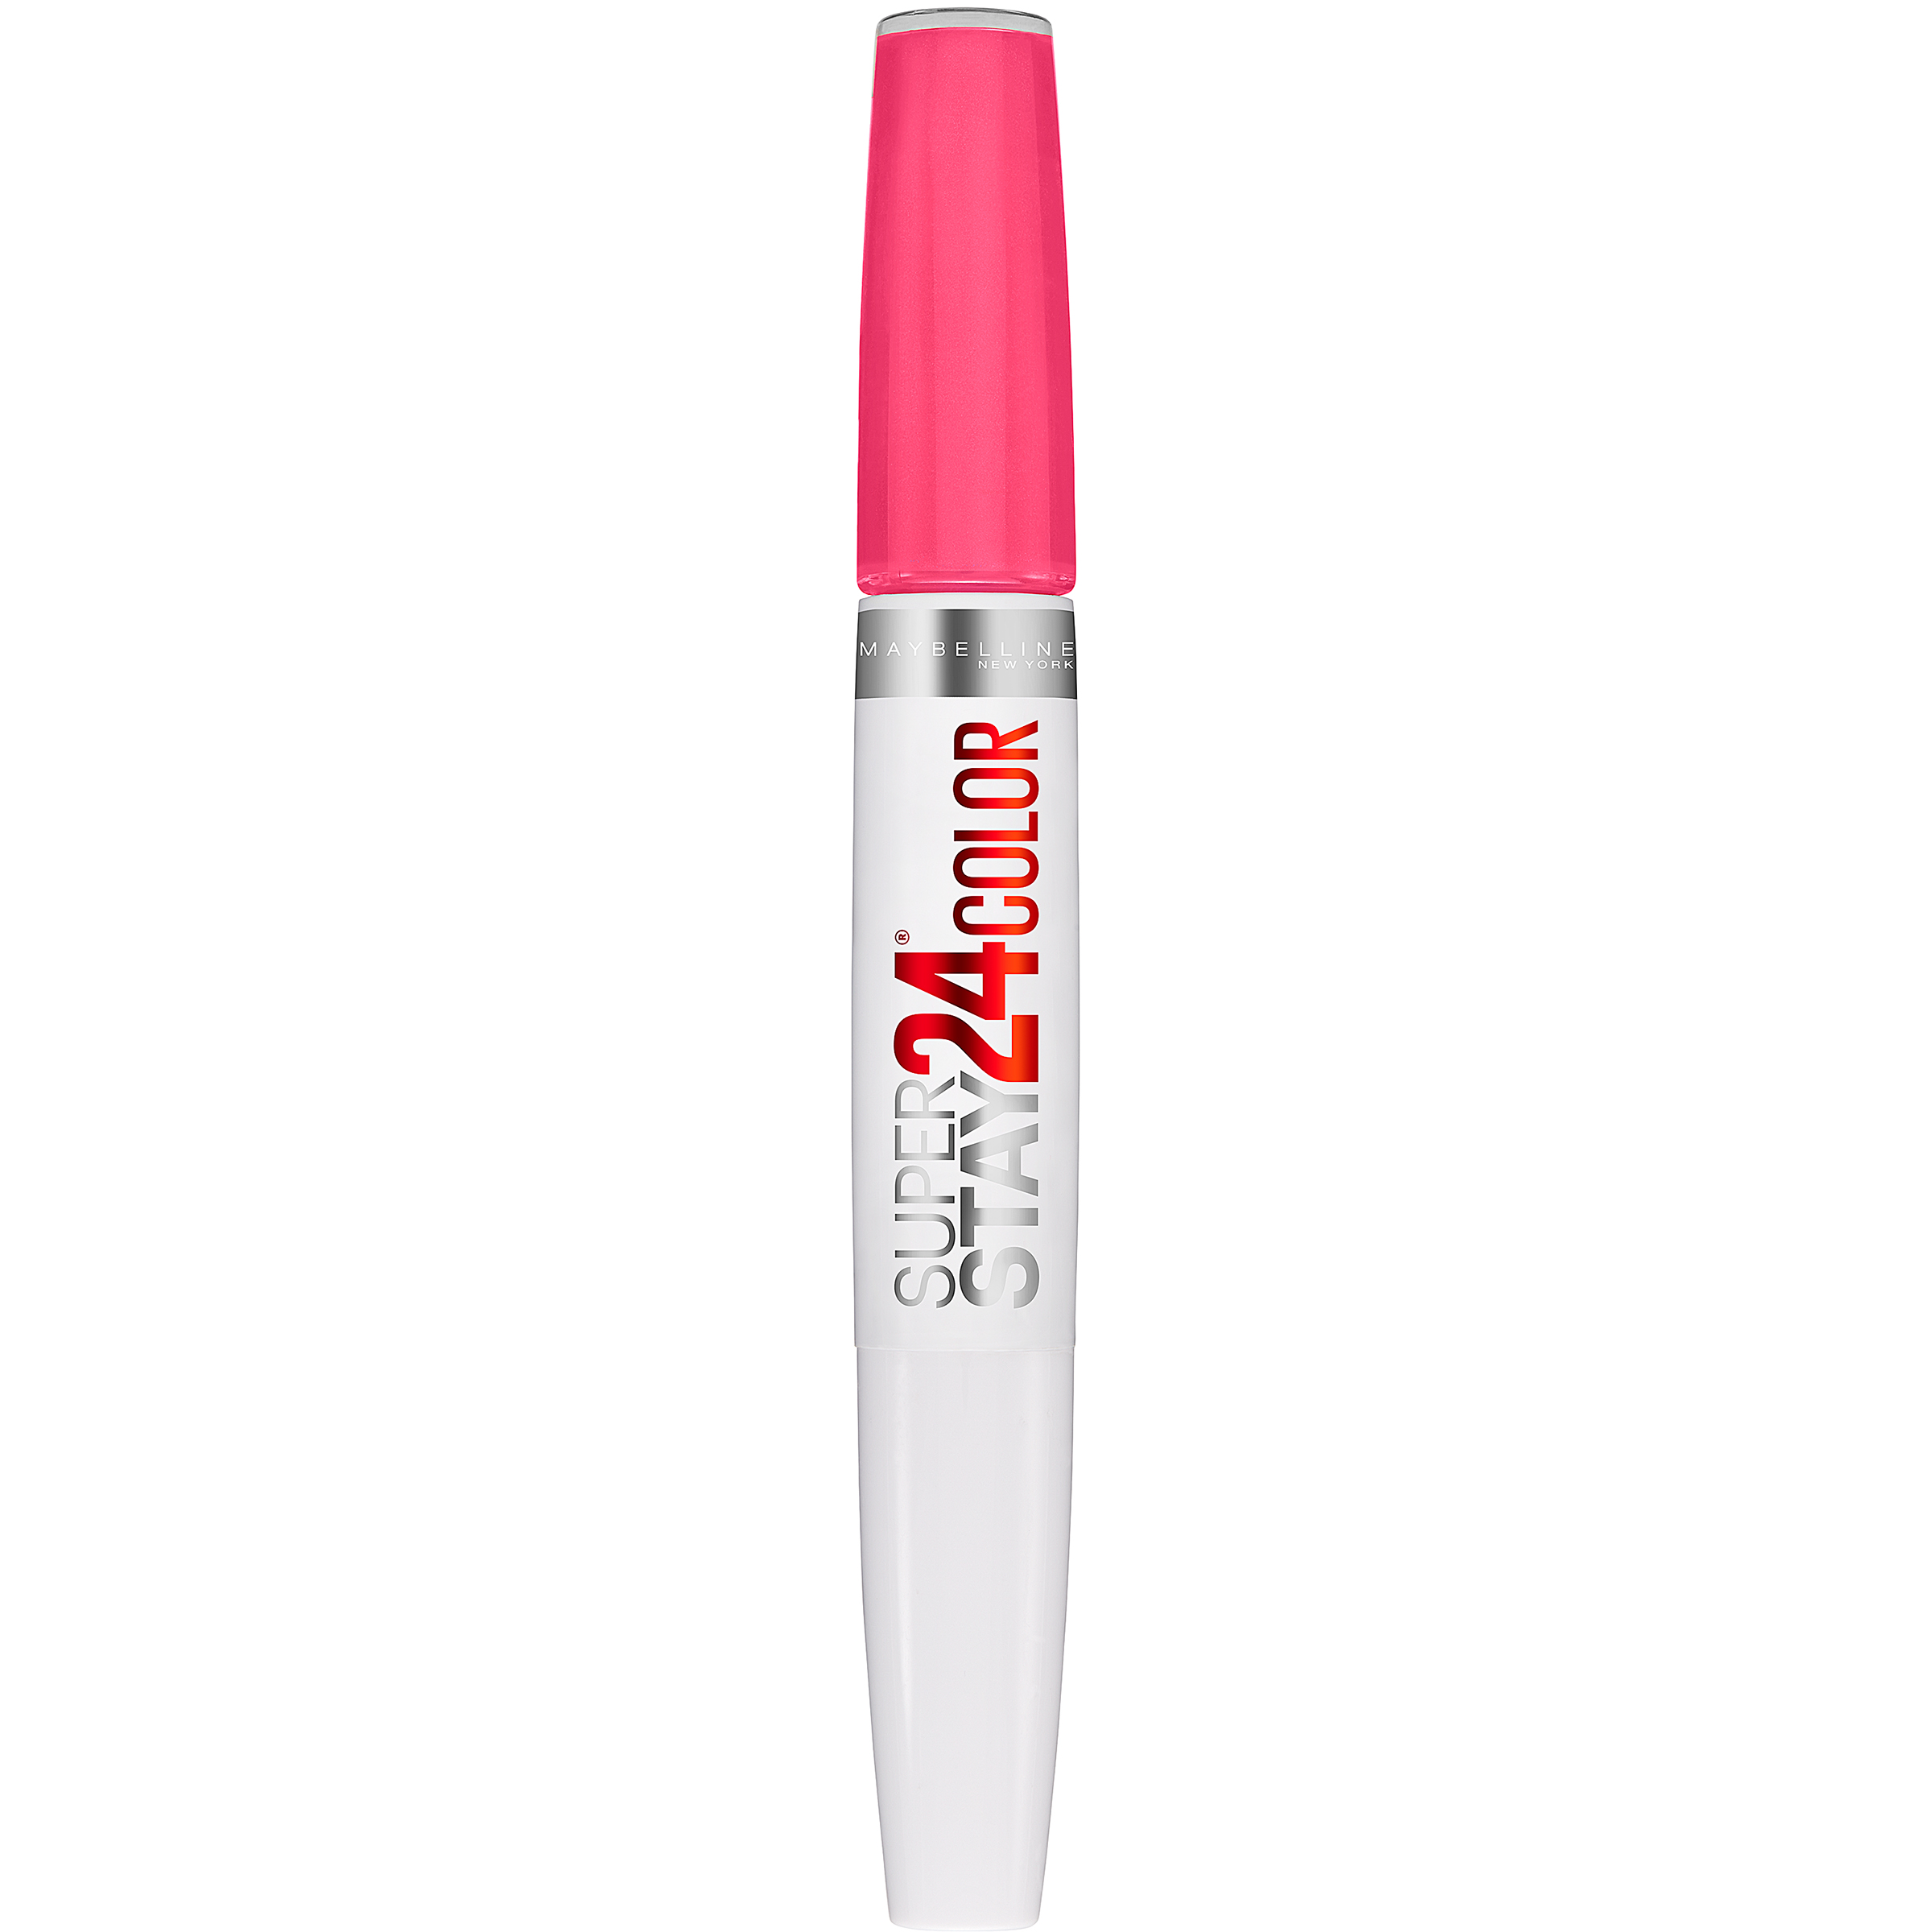 Maybelline New York Maybelline SuperStay 24 Liquid Lipstick, Pink Goes On, 1 kit